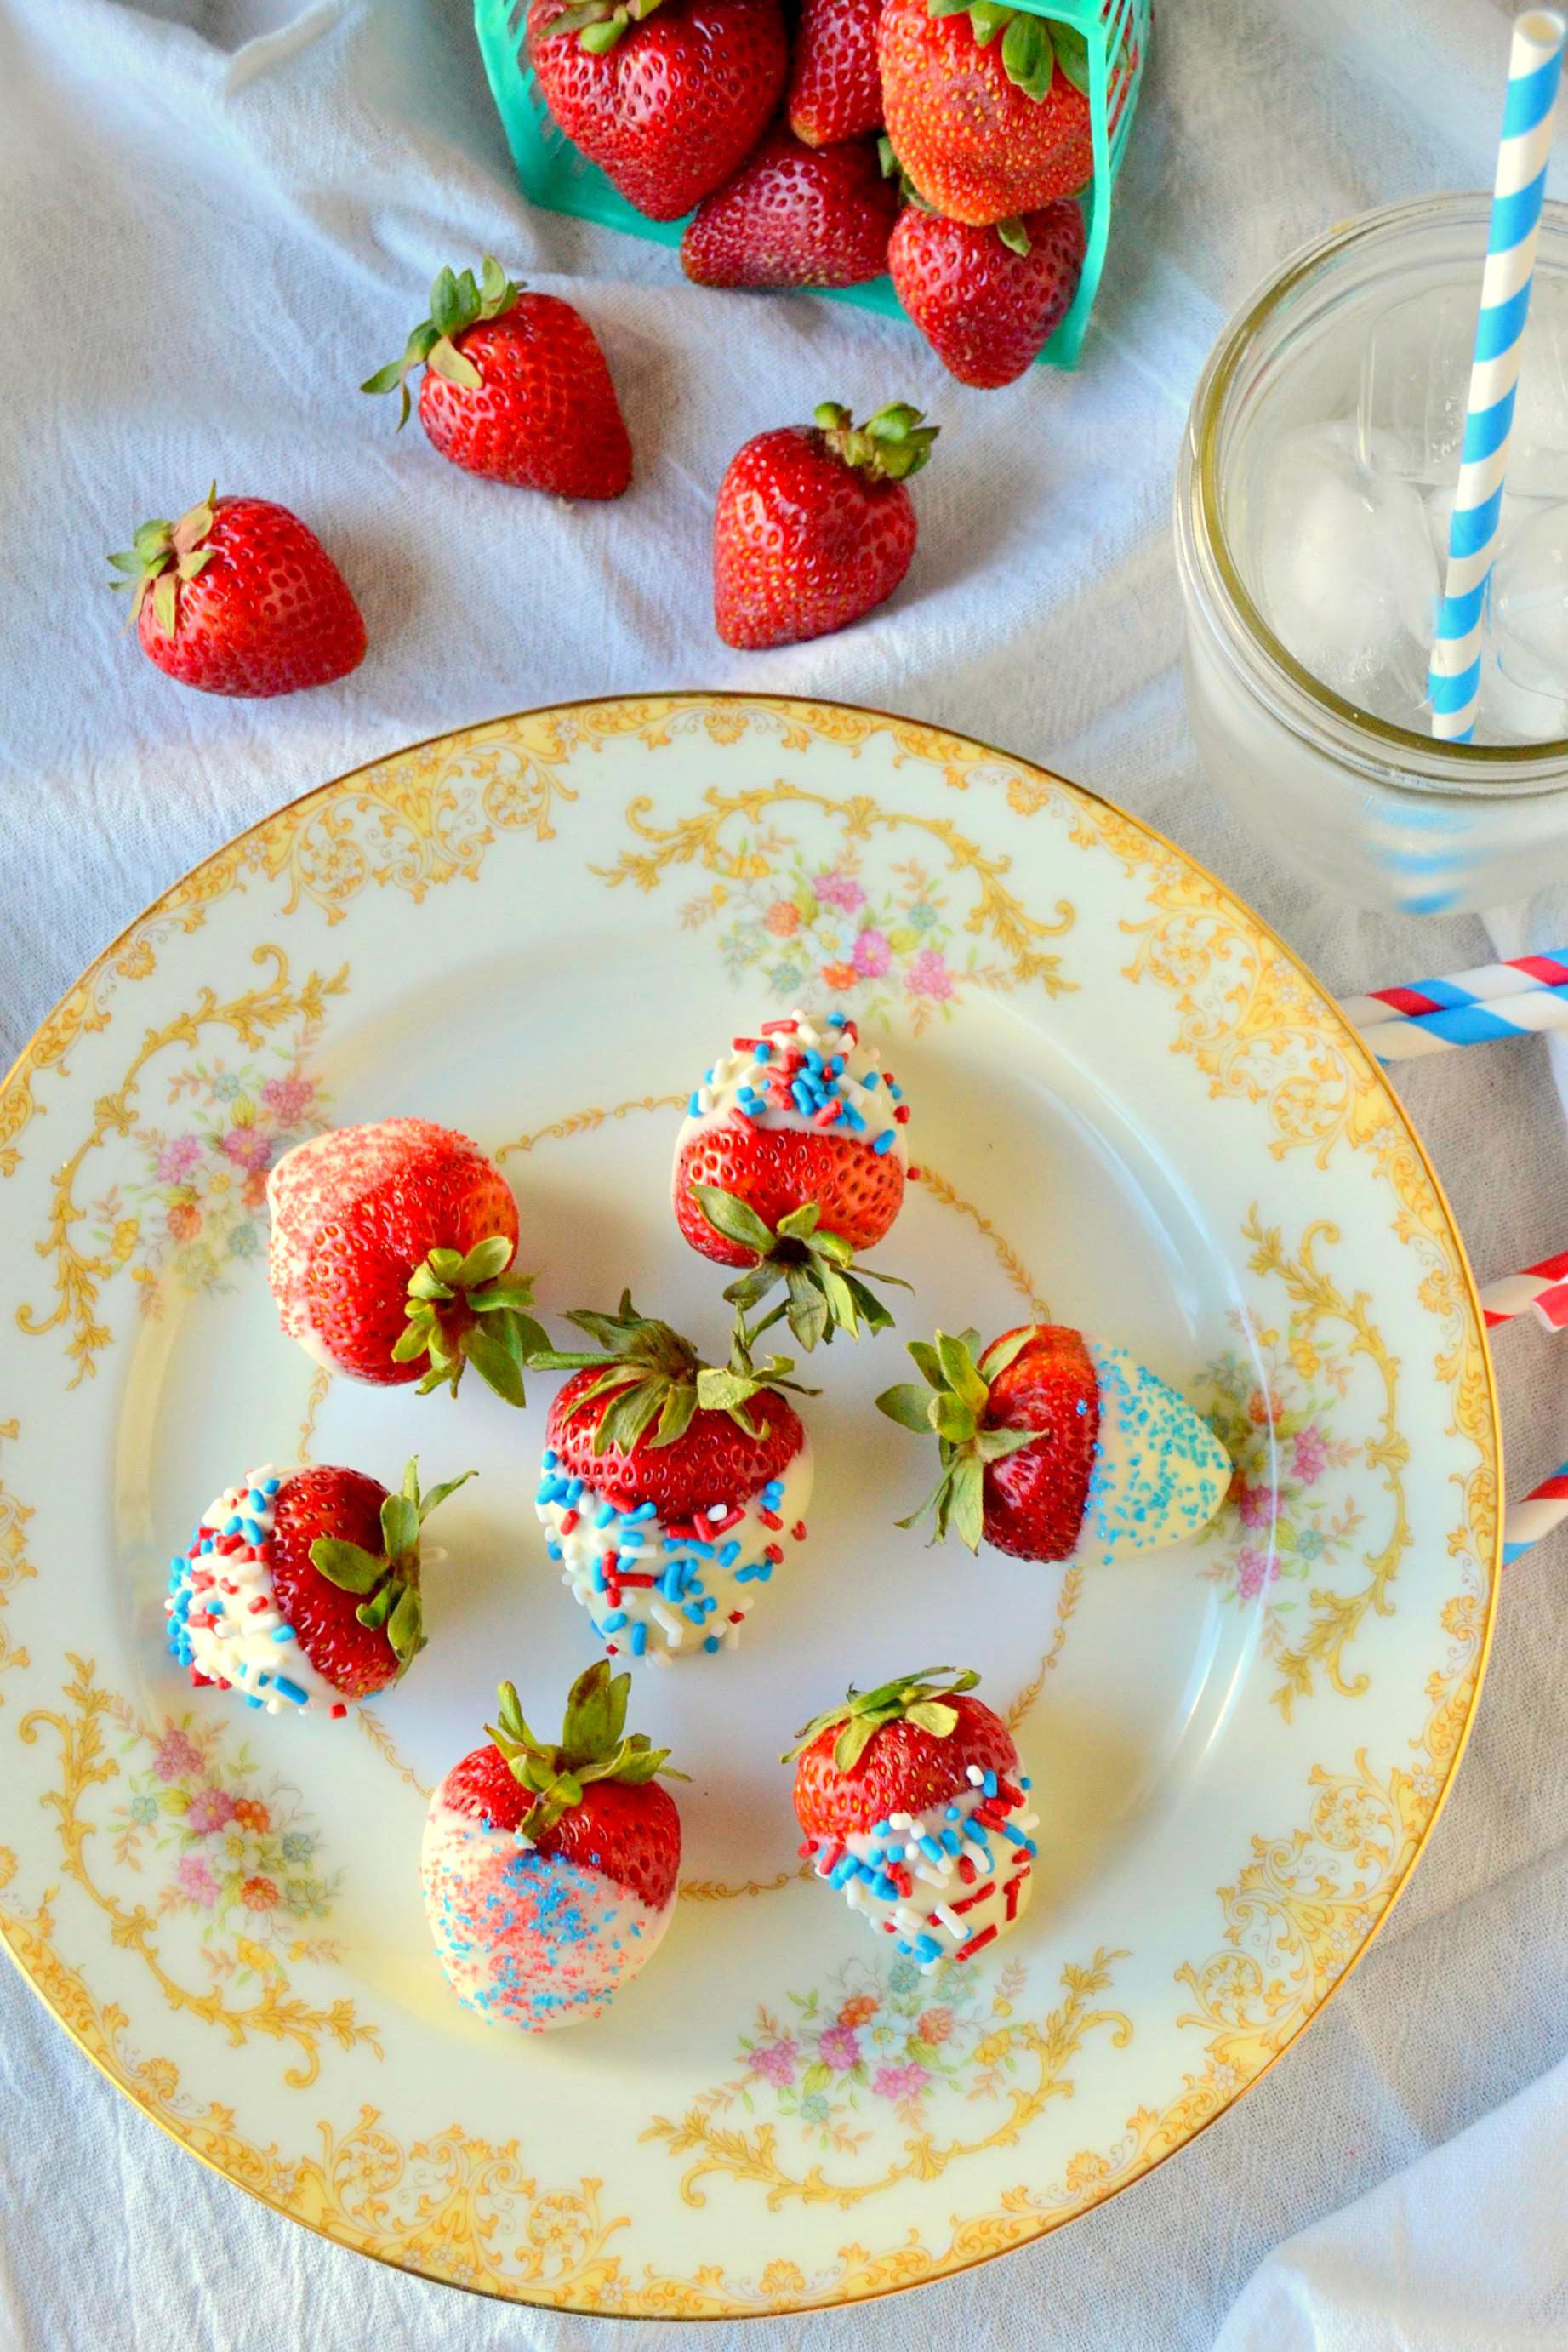 White Chocolate and Sprinkle Covered Strawberries